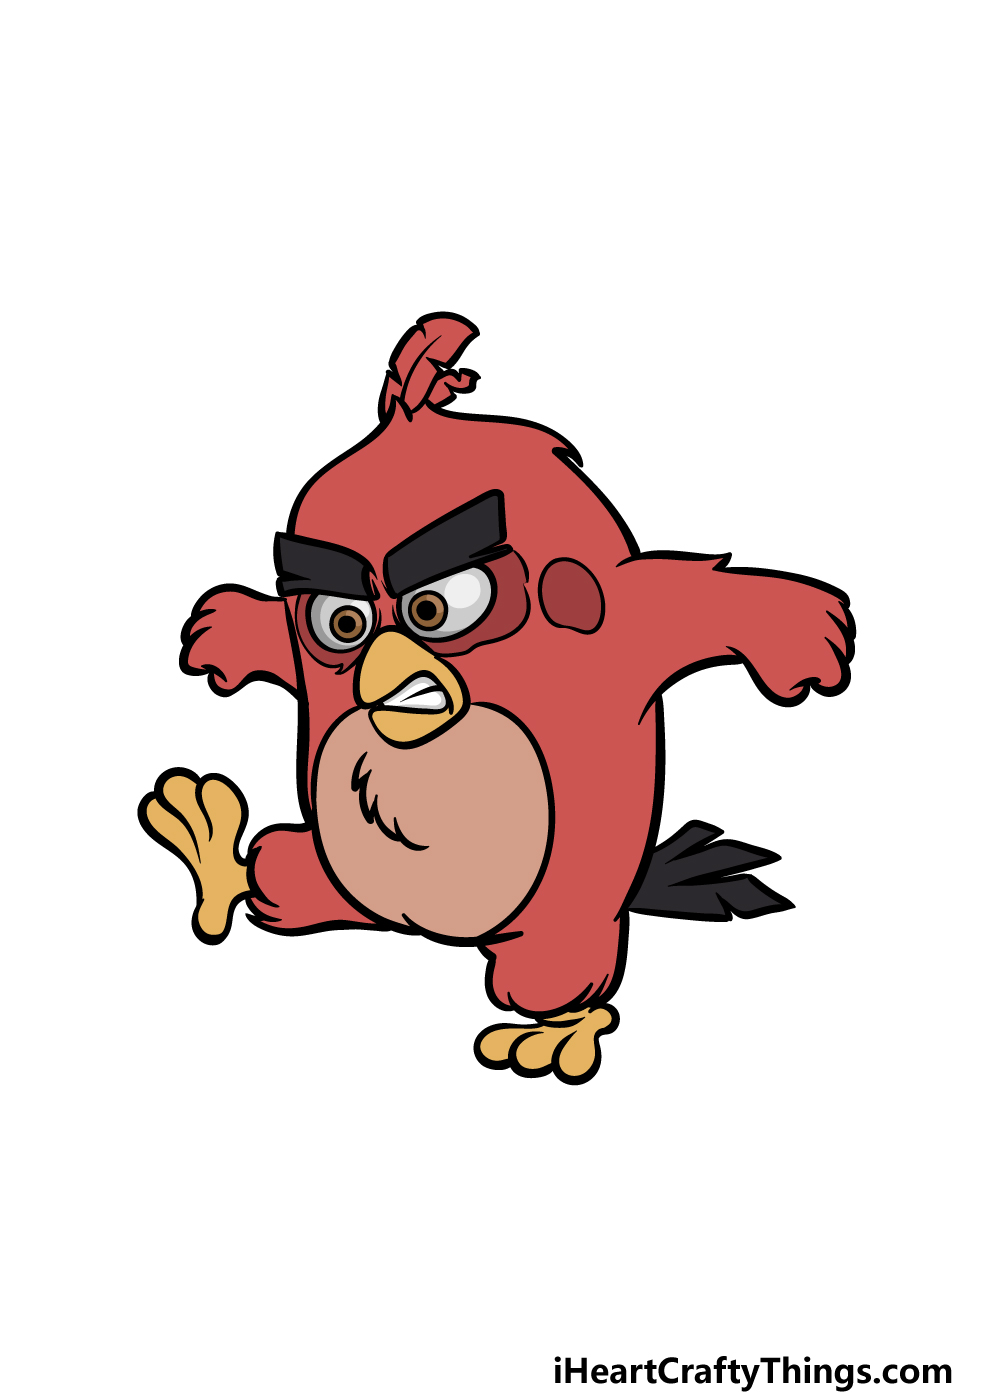 How To Draw Angry Bird – A Step by Step Guide